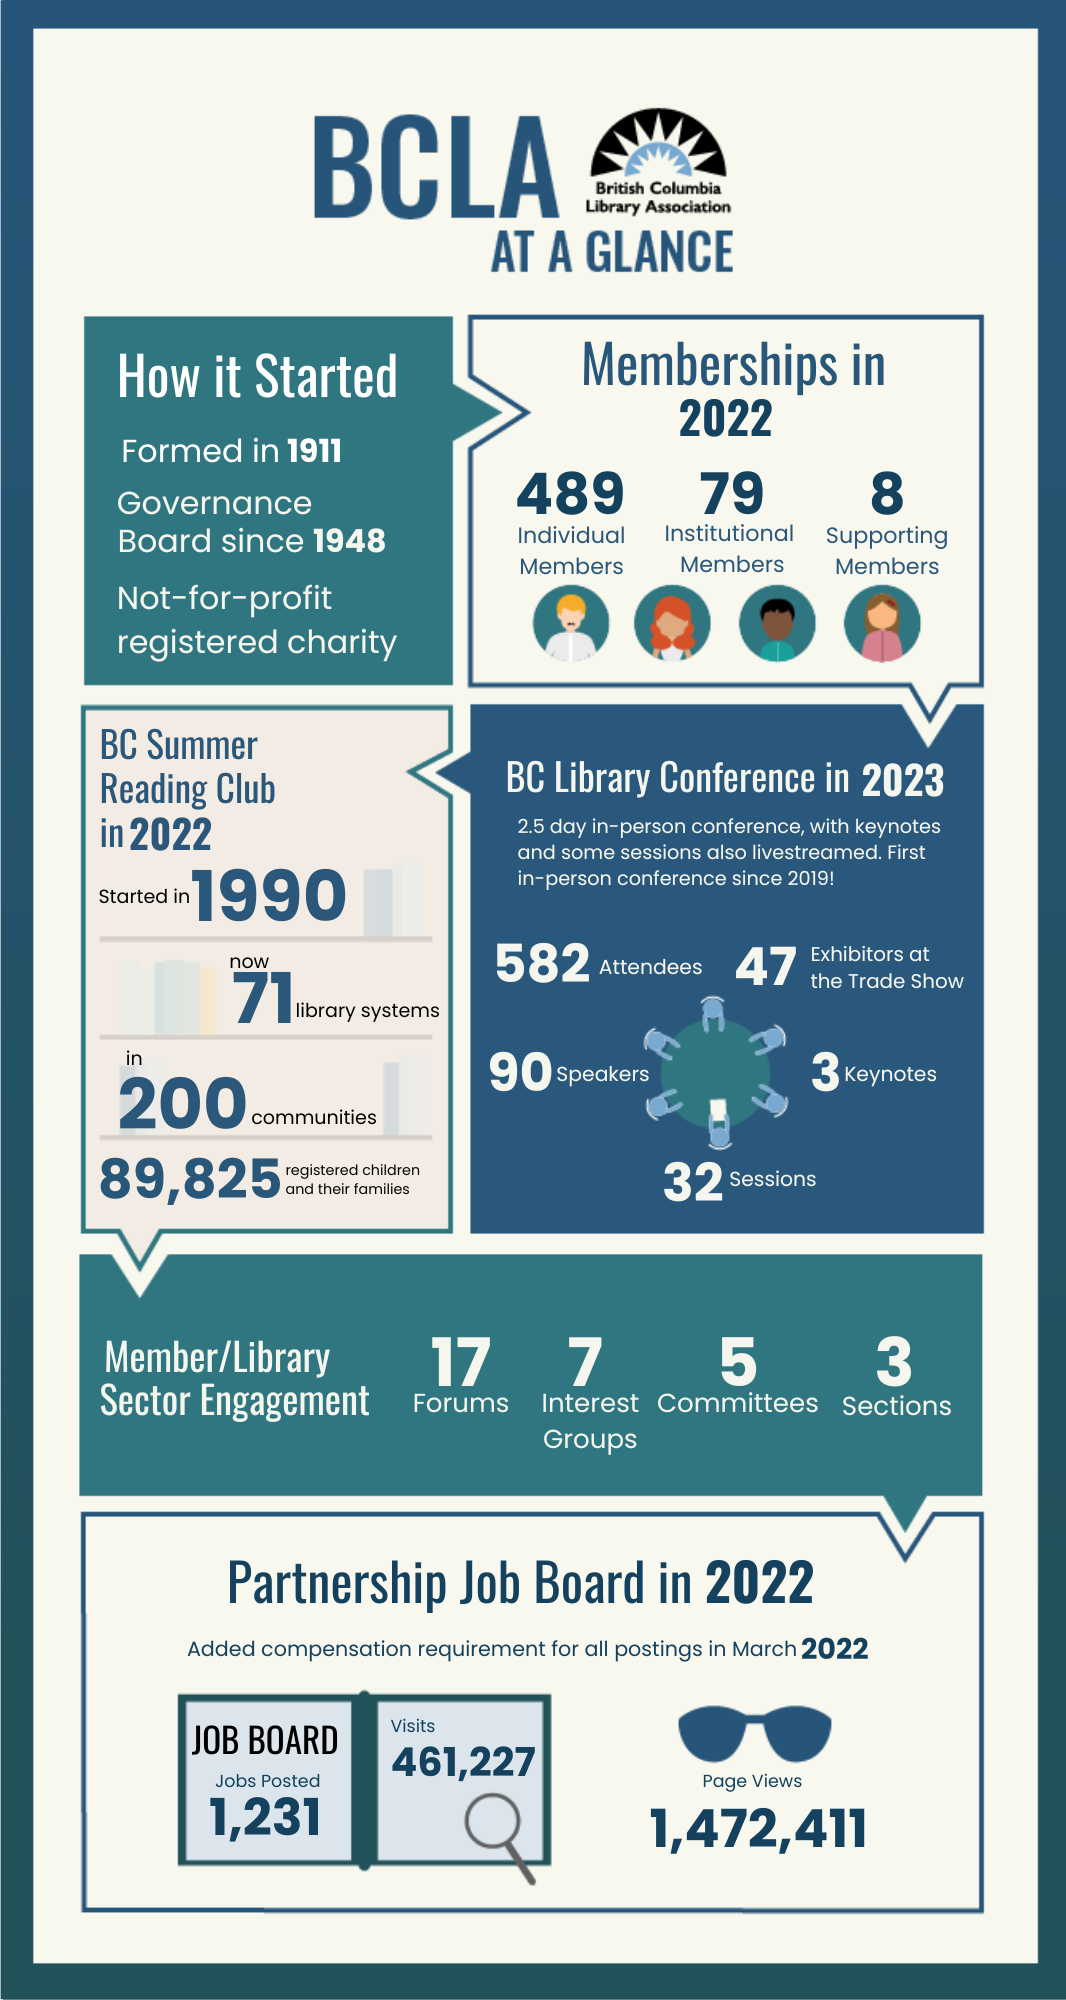 BCLA Infographic:<br />
How it Started<br />
Formed in 1911<br />
Governance Board since 1948<br />
Not-for-profit registered charity<br />
BC Summer Reading Club in 2022<br />
started in 1990<br />
Now 71 library systems<br />
in 200 communities<br />
89,825 registered children and their families</p>
<p>BC Library Conference in 2023<br />
2.5 day in-person conference, with keynotes and some sessions also livestreamed. First in-person conference since 2019!<br />
582 Attendees<br />
47 Exhibitors at the Trade Show<br />
90 Speakers<br />
3 Keynotes<br />
32 Sessions</p>
<p>Member/Library Sector Engagement<br />
17 Forums<br />
7 Interest Groups<br />
5 Committees<br />
3 Sections</p>
<p>Partnership Job Board in 2022<br />
Added compensation requirement for all postings in March 2022<br />
JOB BOARD Jobs posted 1,231<br />
Visits 461,227<br />
Page Views 1,472,411<br />
